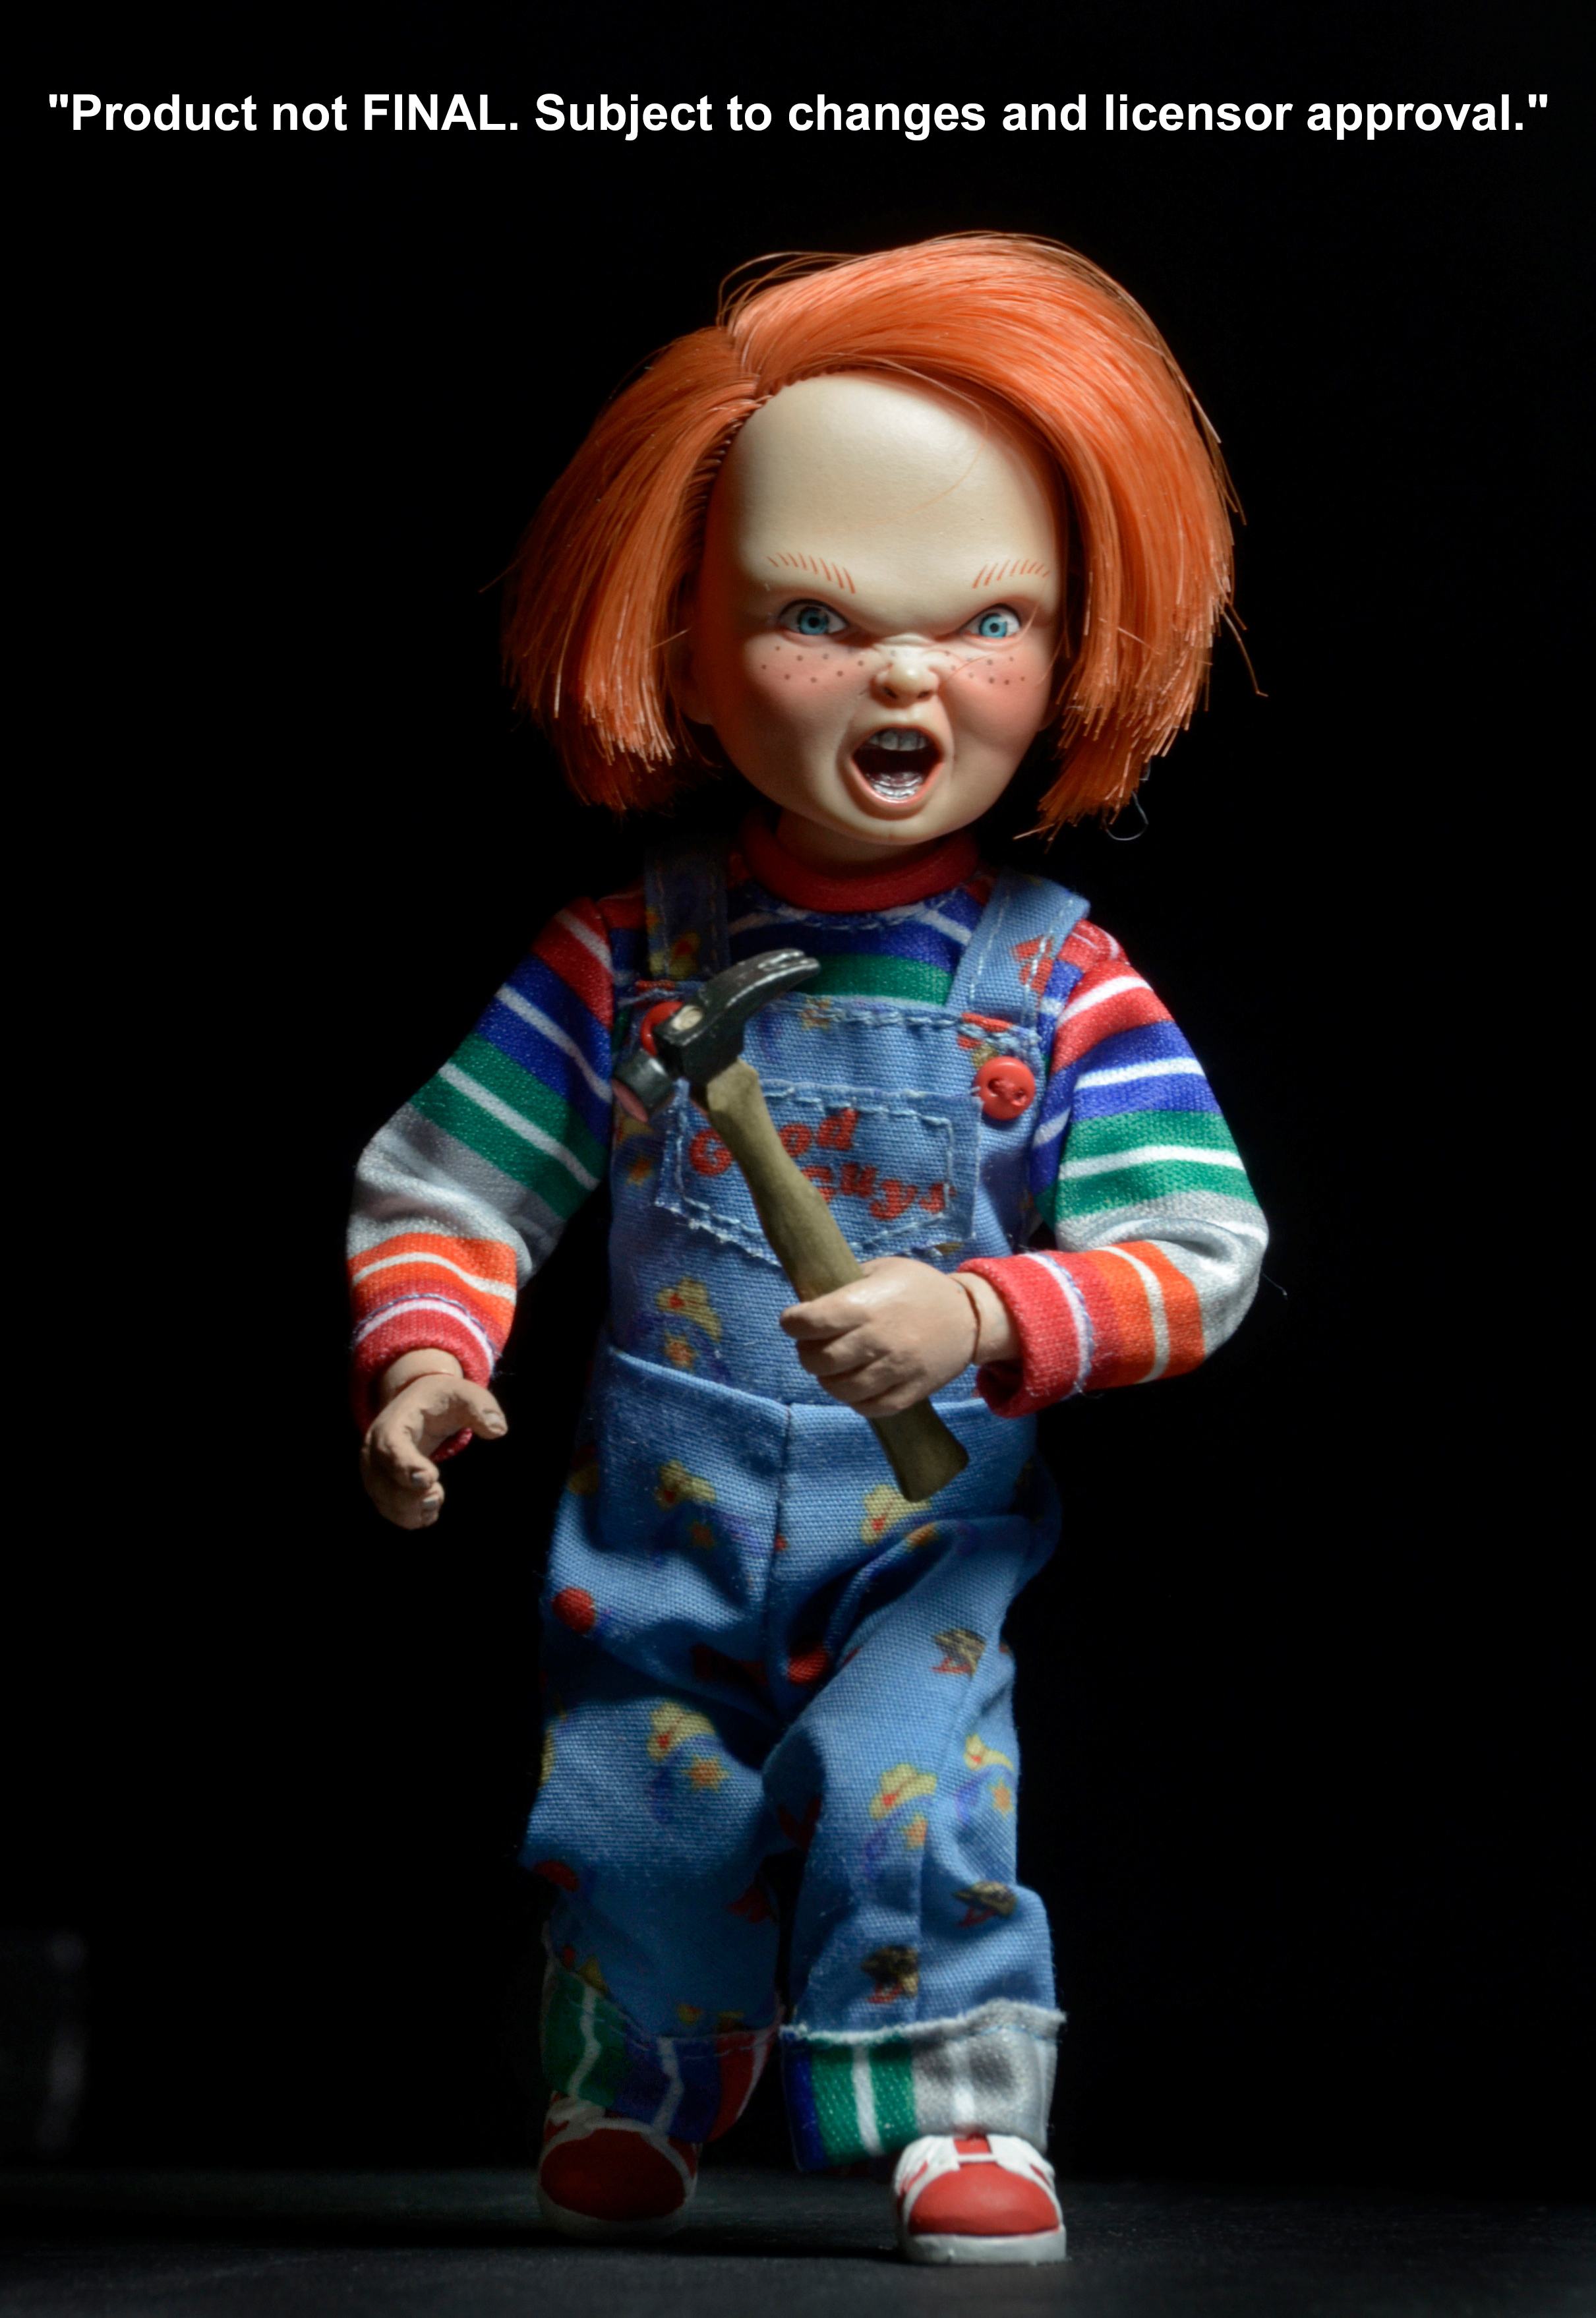 Childs-Play-Chucky-8-Inch-Cloth-Retro-Action-Figure-04